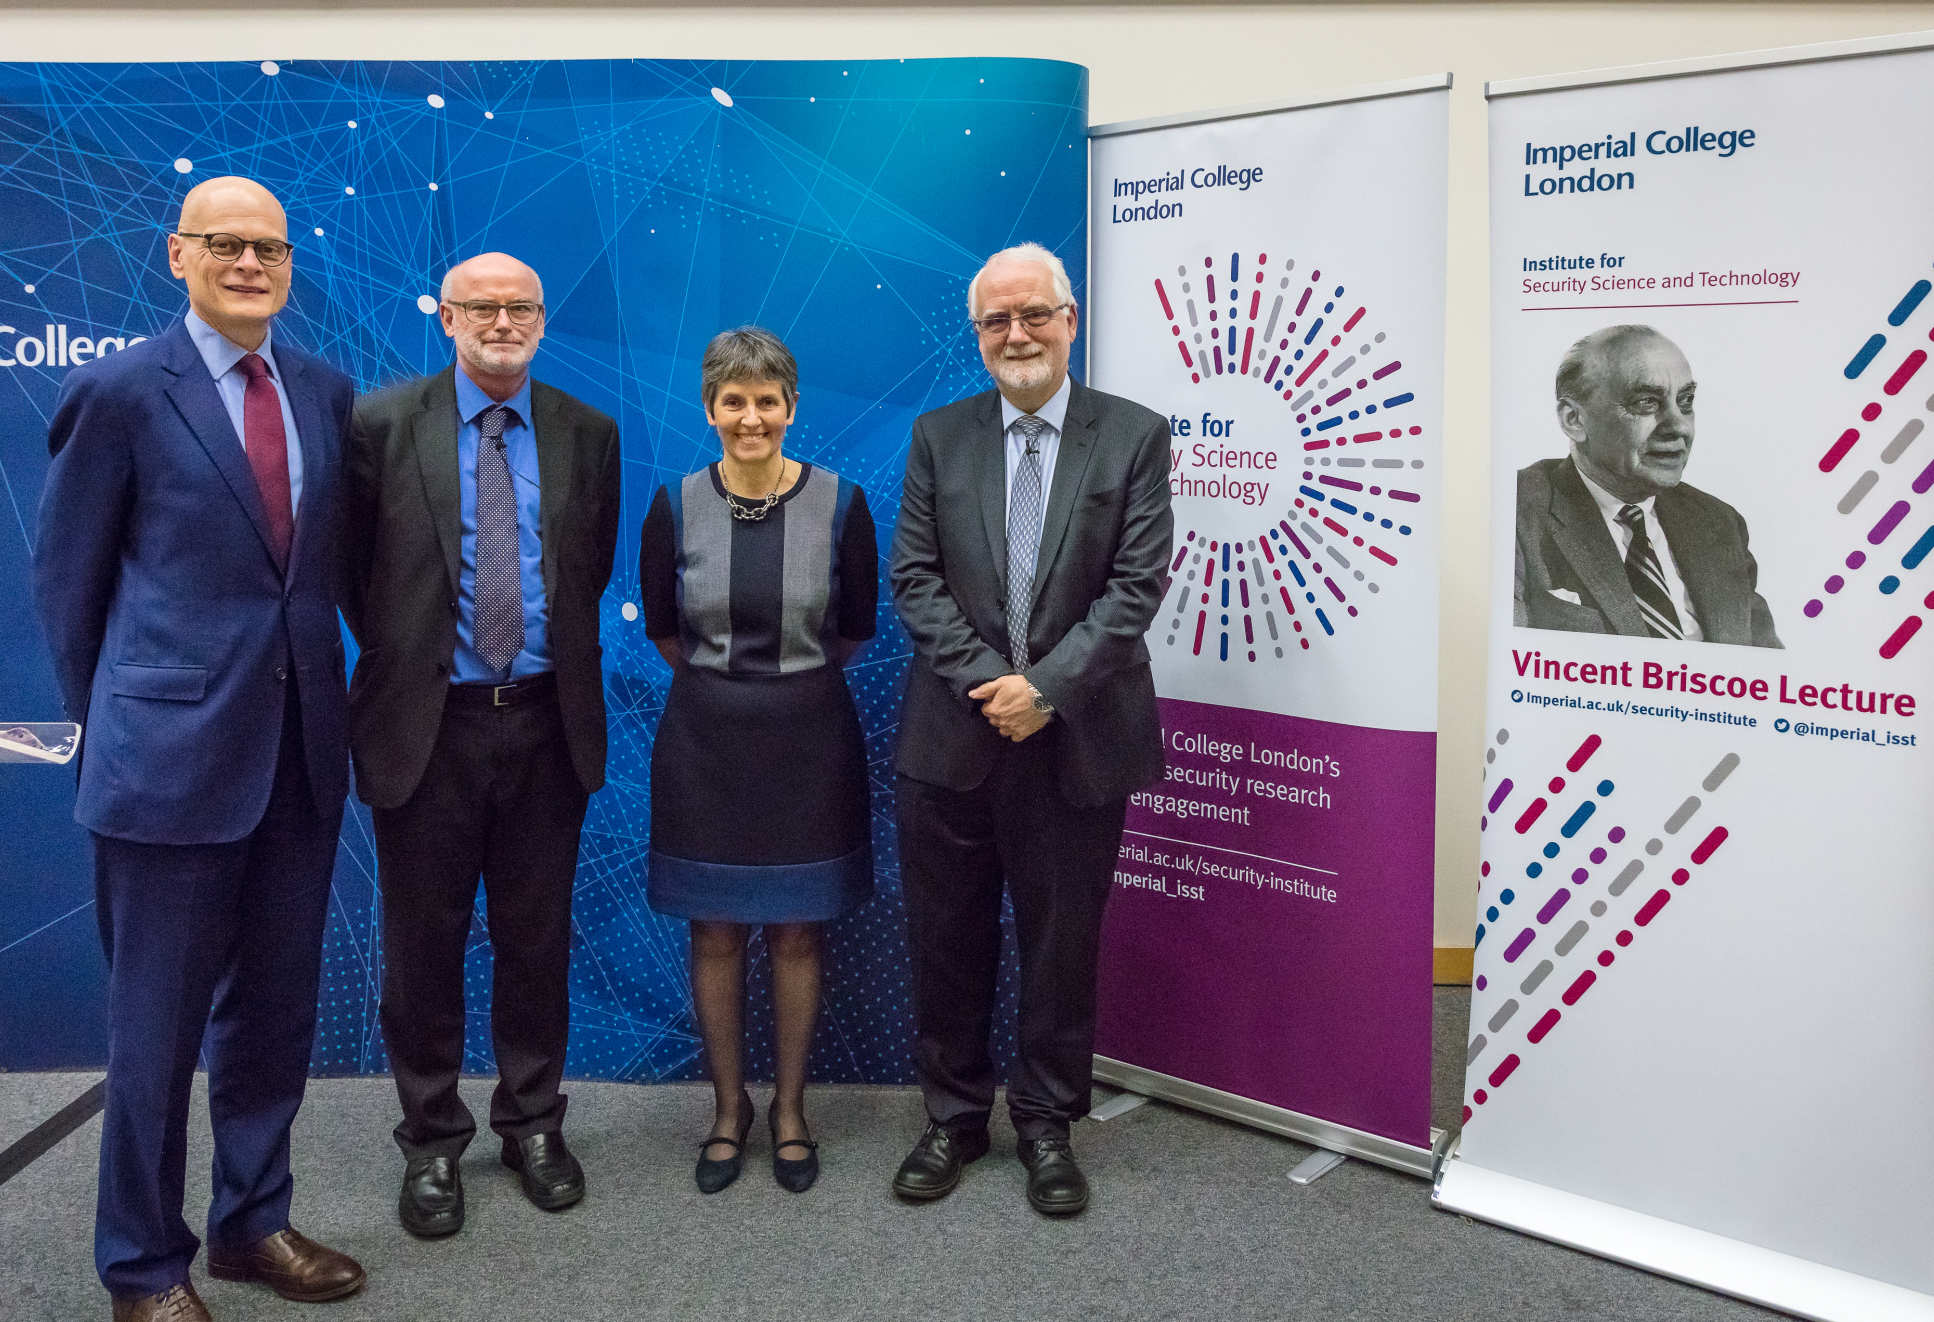 Photo of Cressida with Imperial's Provost and Heads of the ISST, in front of Vincent Briscoe lecture branding